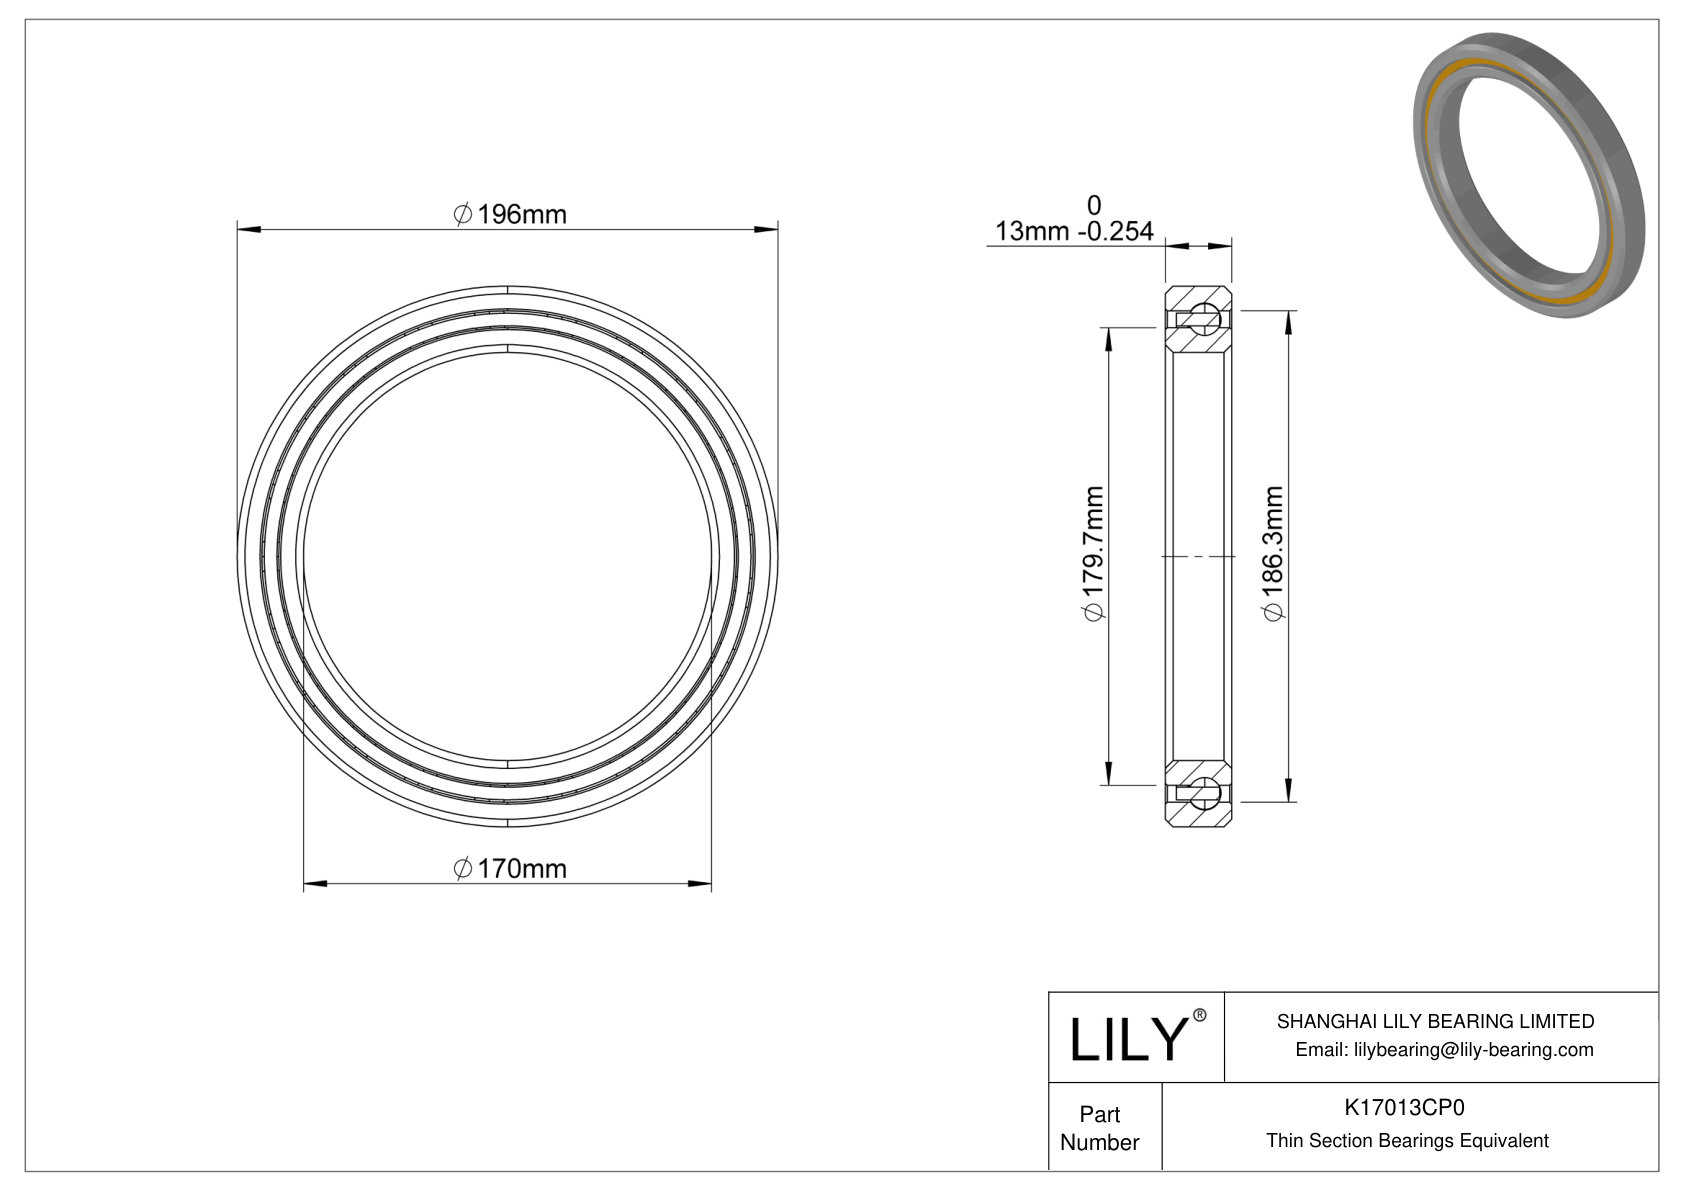 K17013CP0 Constant Section (CS) Bearings cad drawing